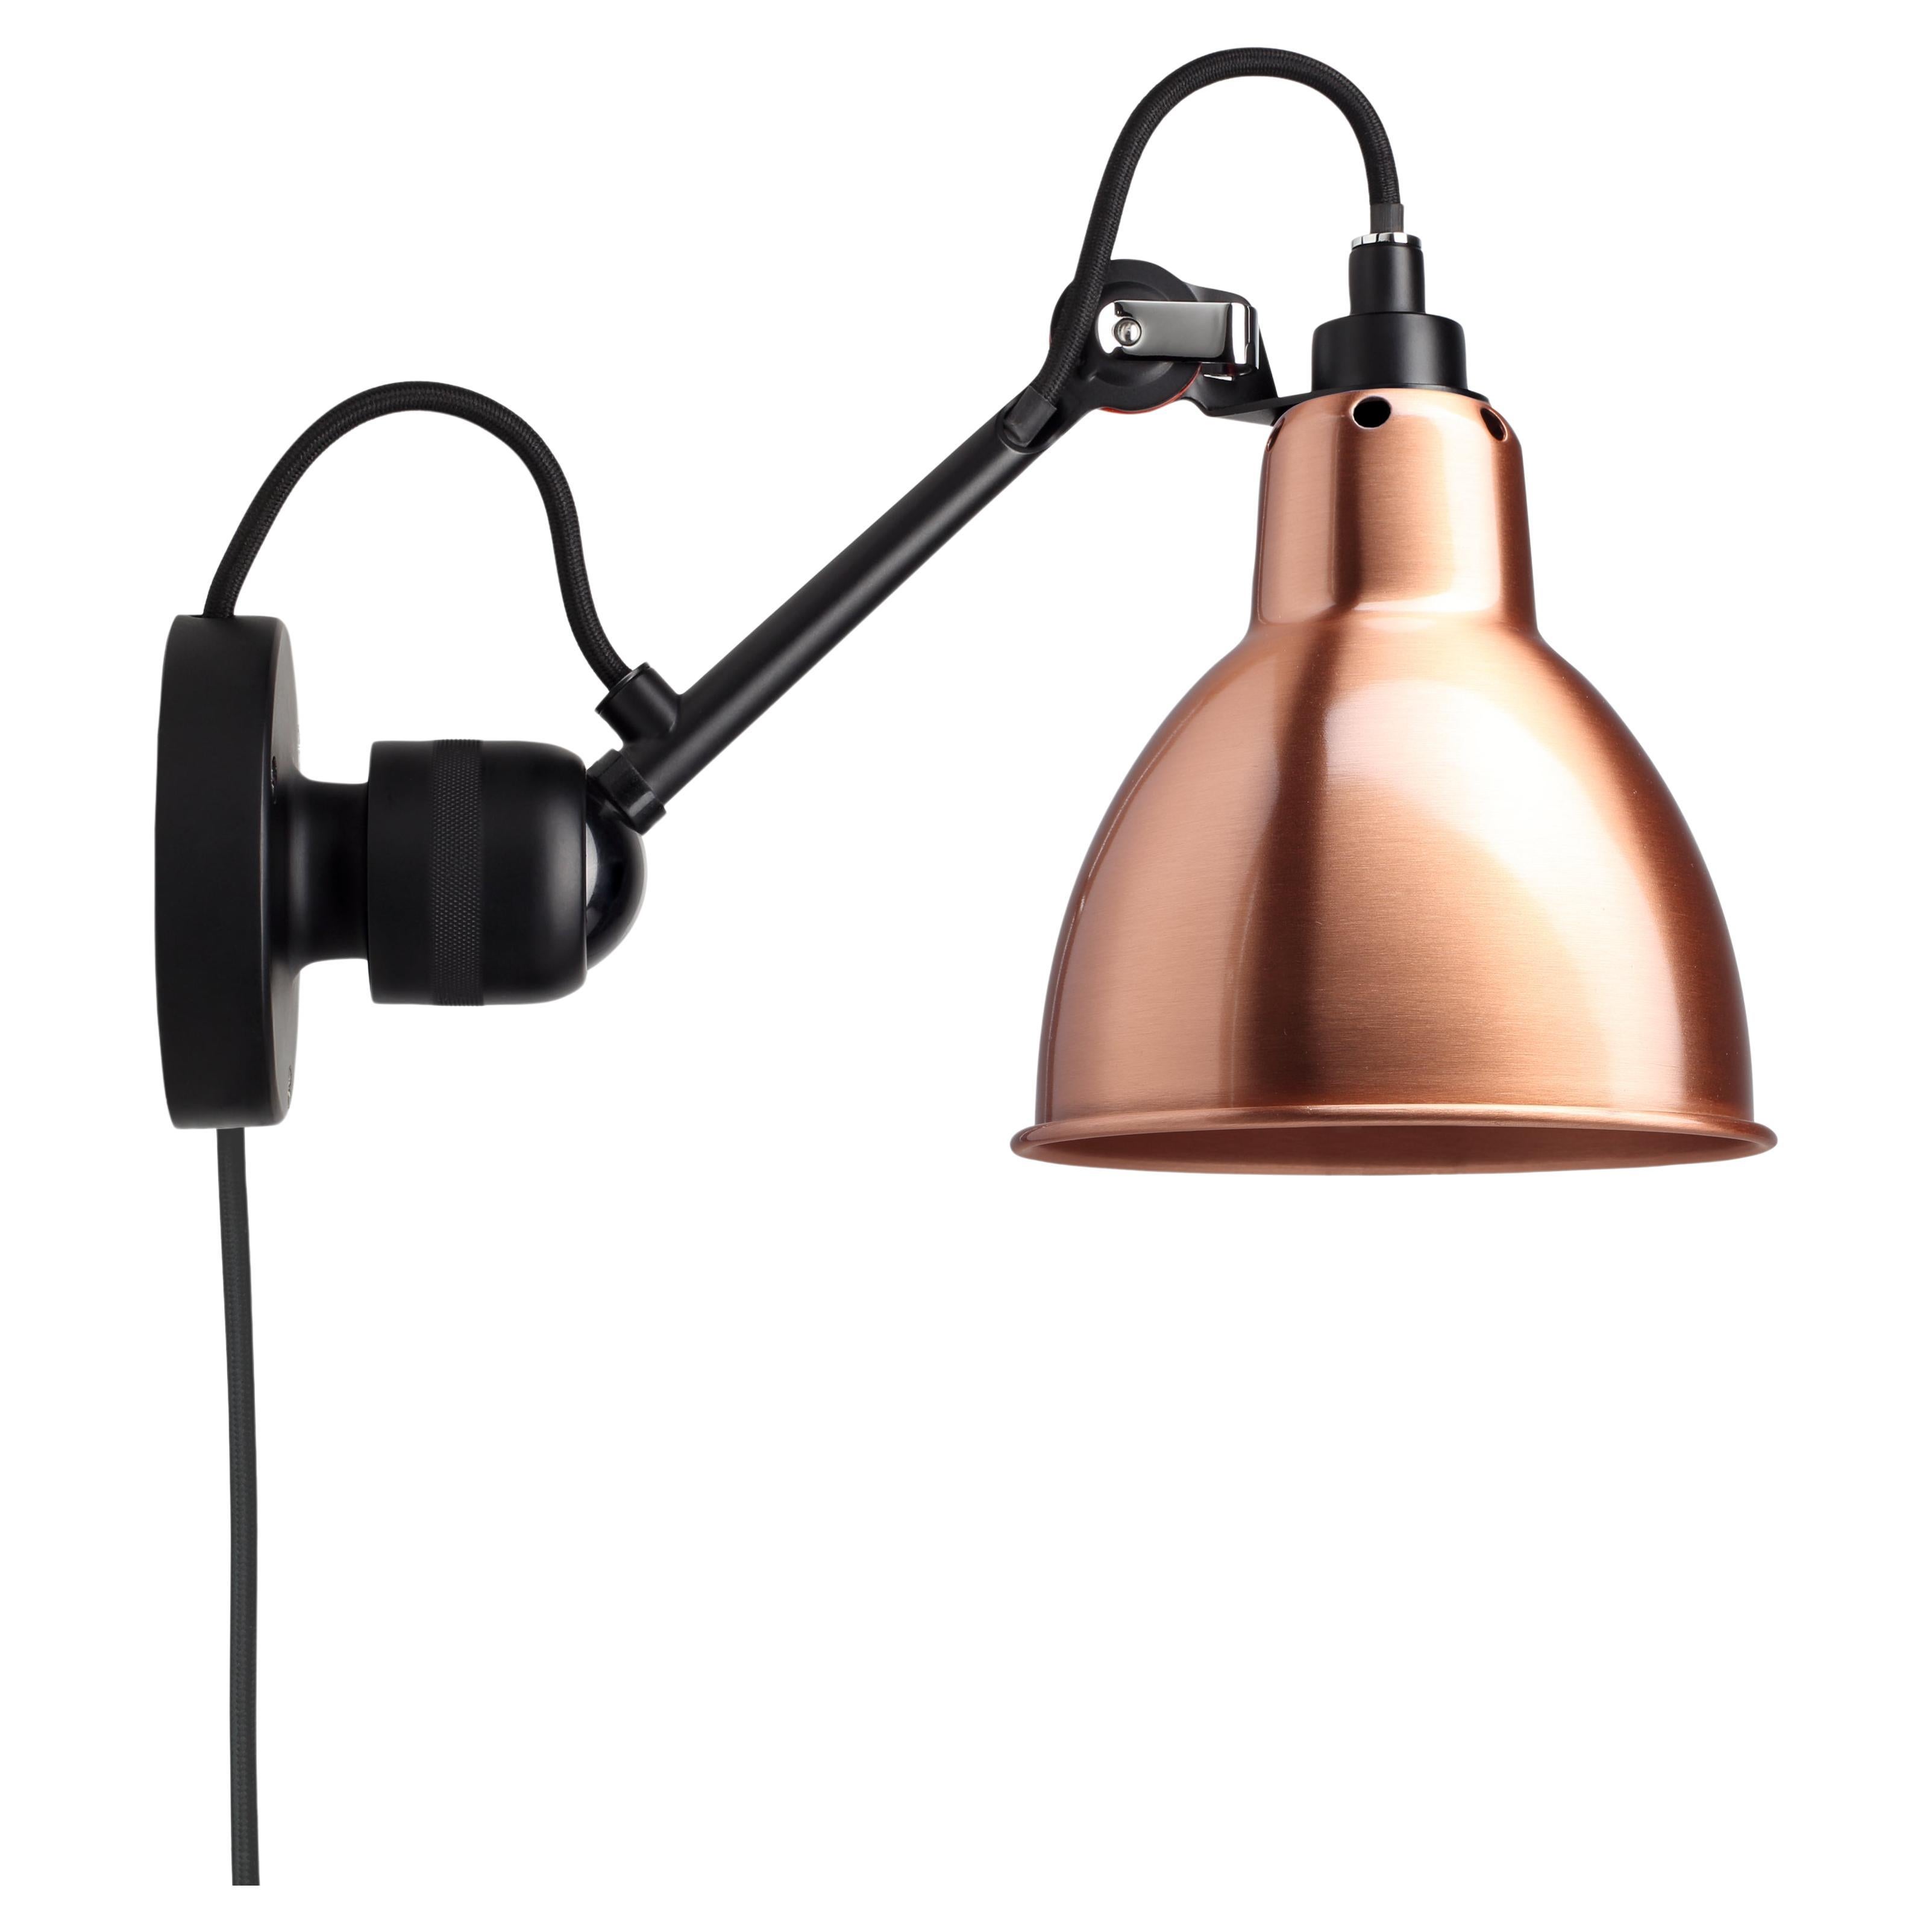 DCW Editions La Lampe Gras N°304 CA Wall Lamp in Black Arm and Copper Shade For Sale